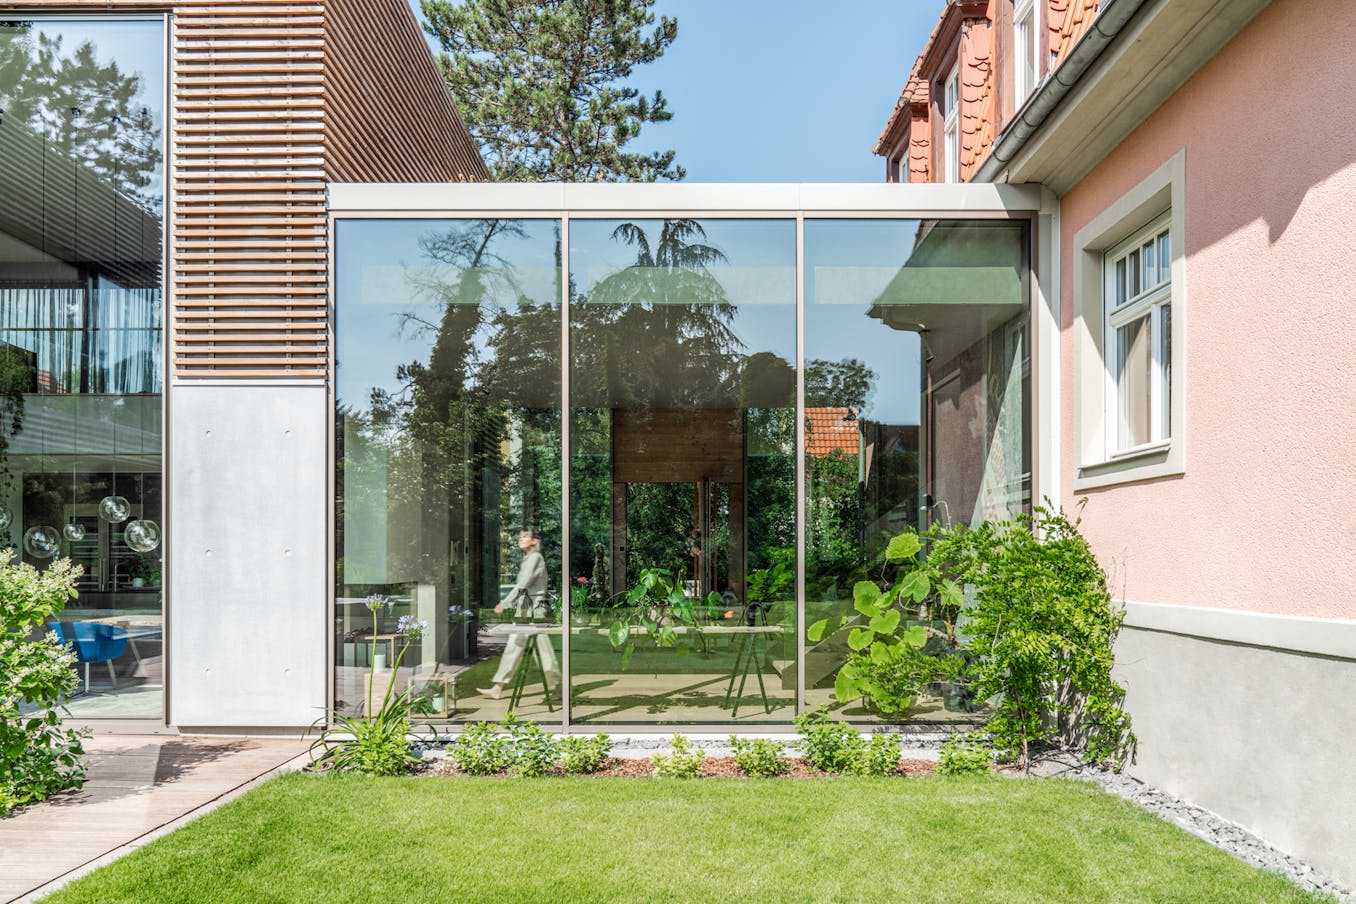 Modern house with large opening glass walls and a green lawn